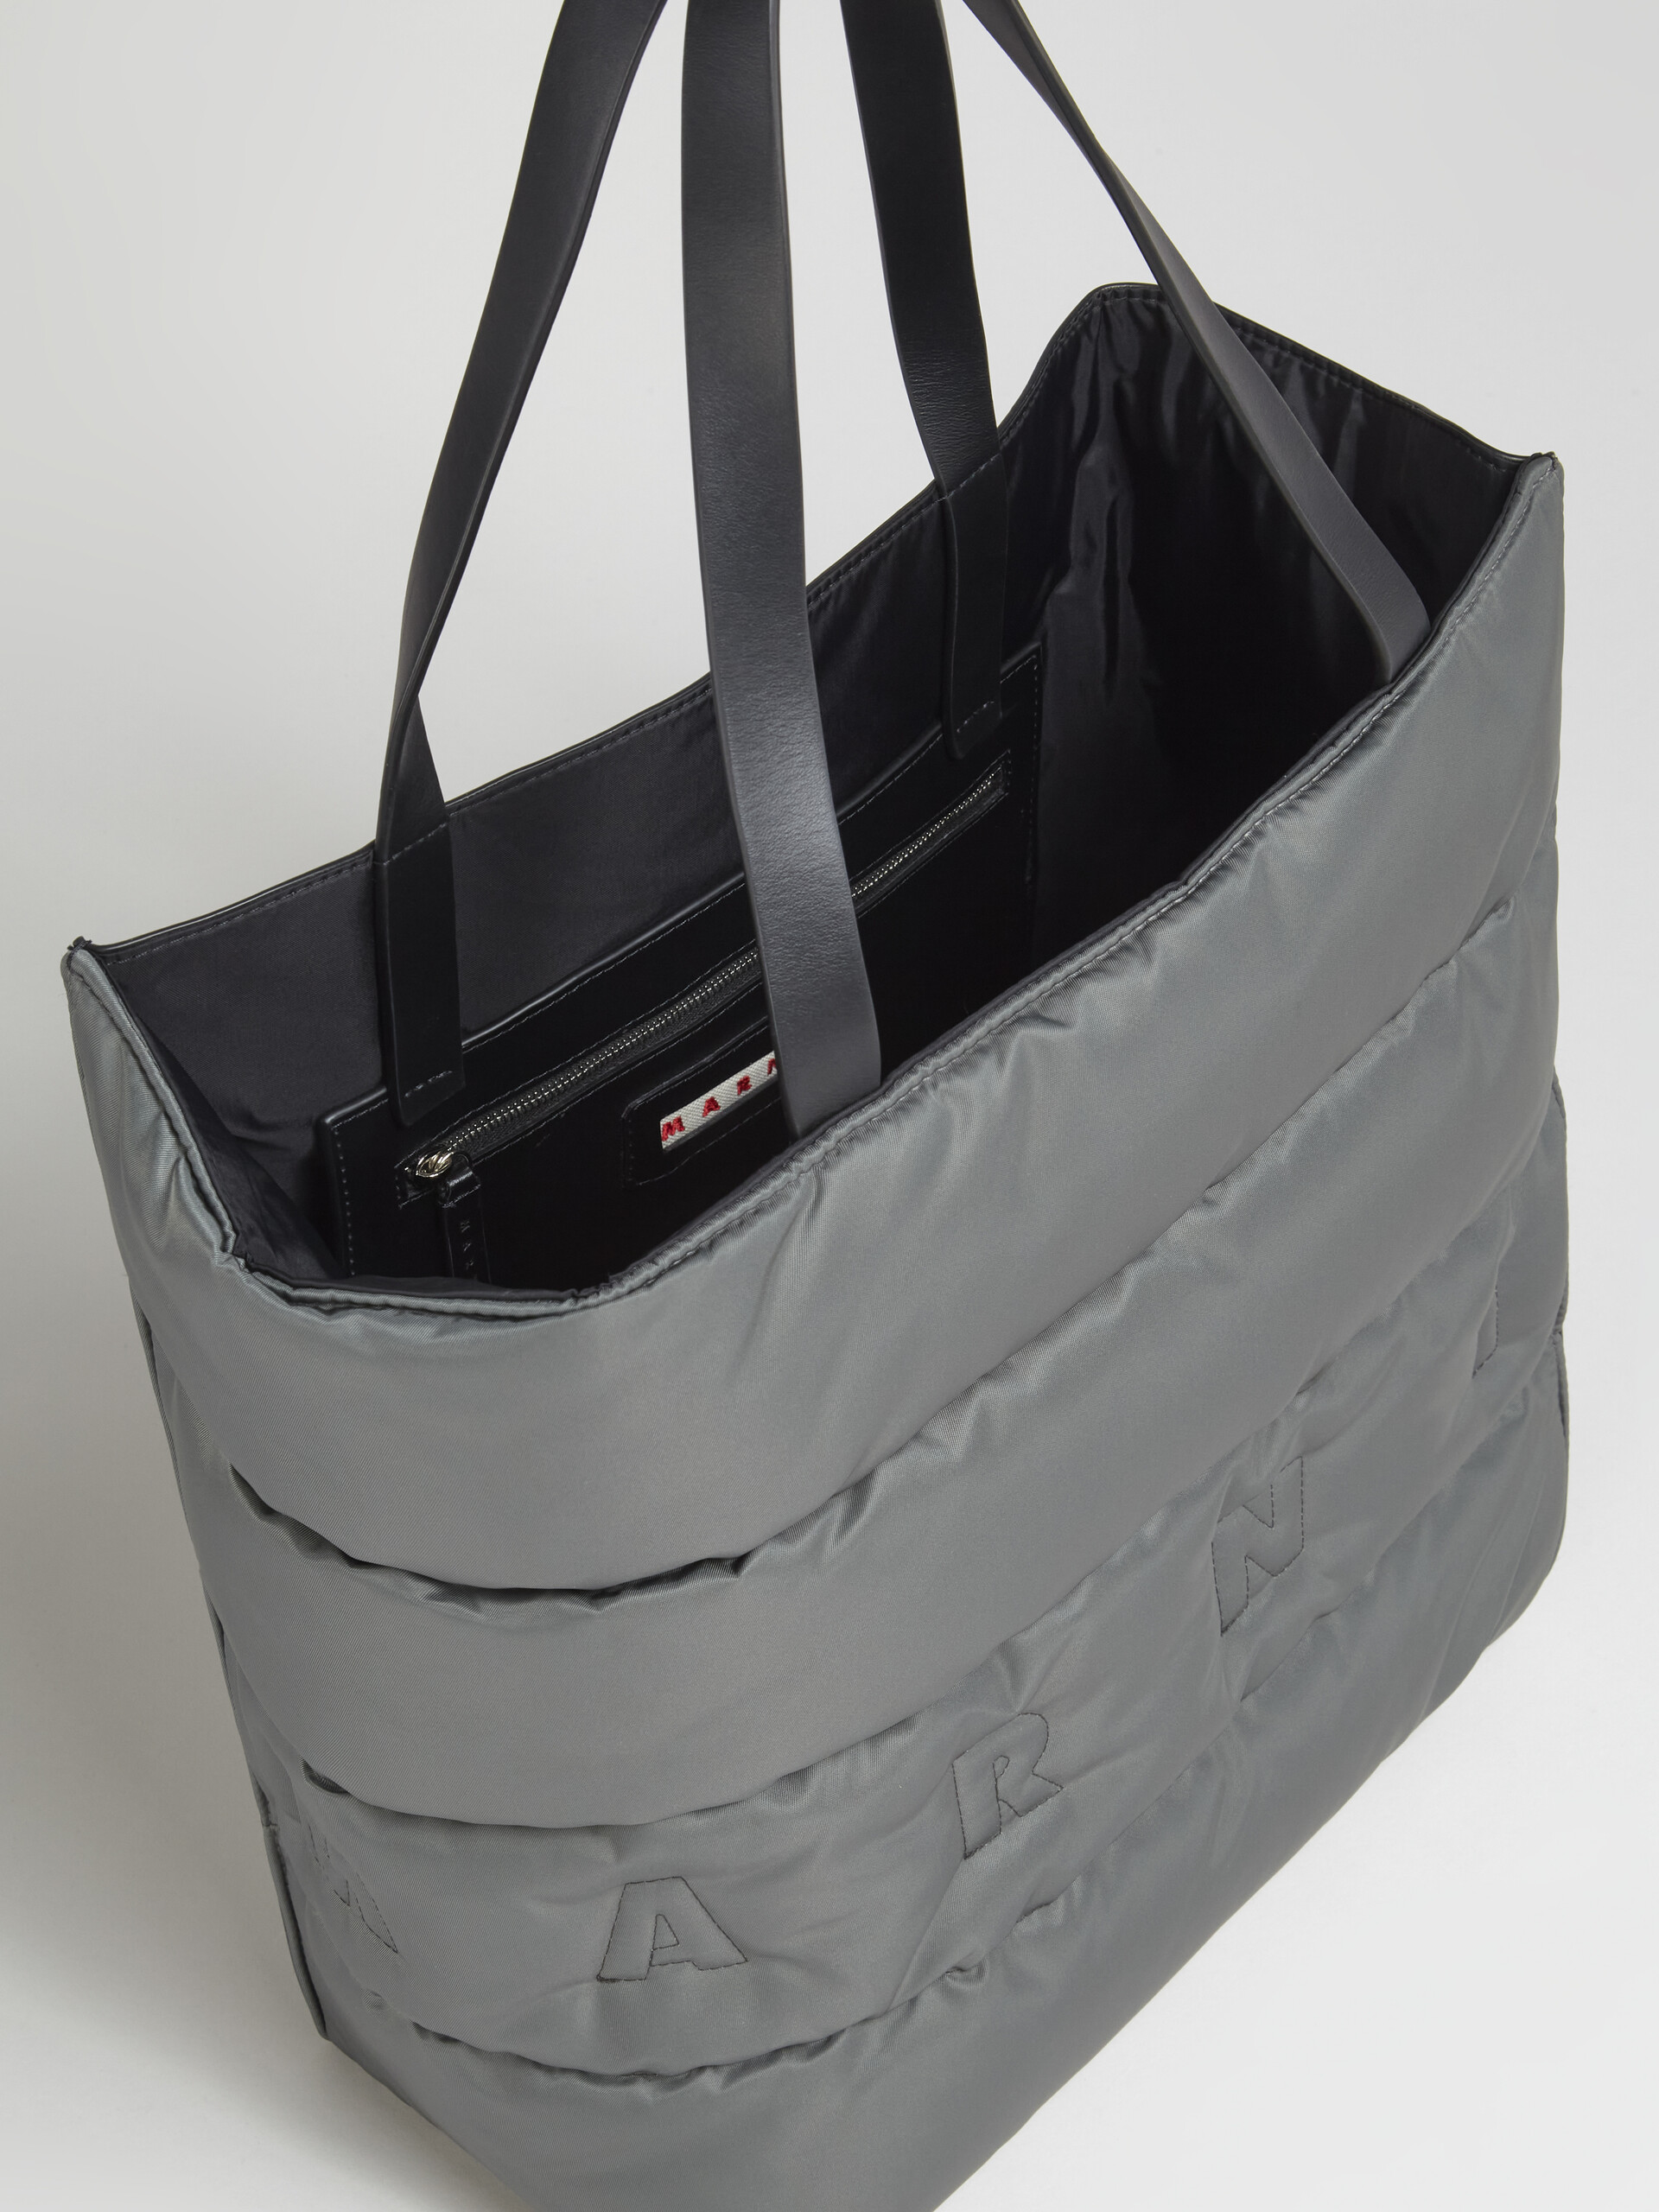 MUSEO tote bag in quilted nylon - Shopping Bags - Image 5